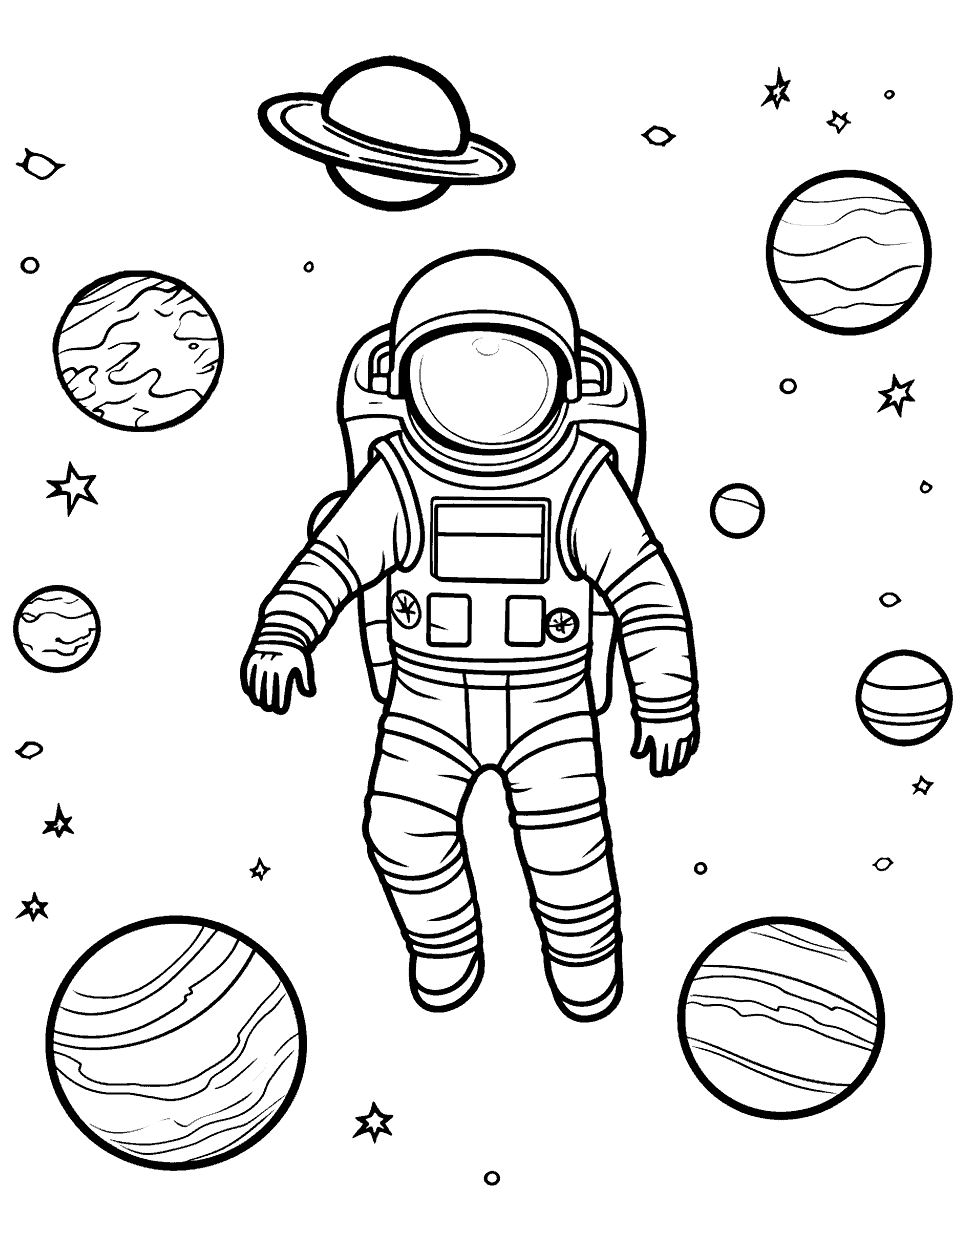 Astronaut on Spacewalk Solar System Coloring Page - An astronaut floating in space.